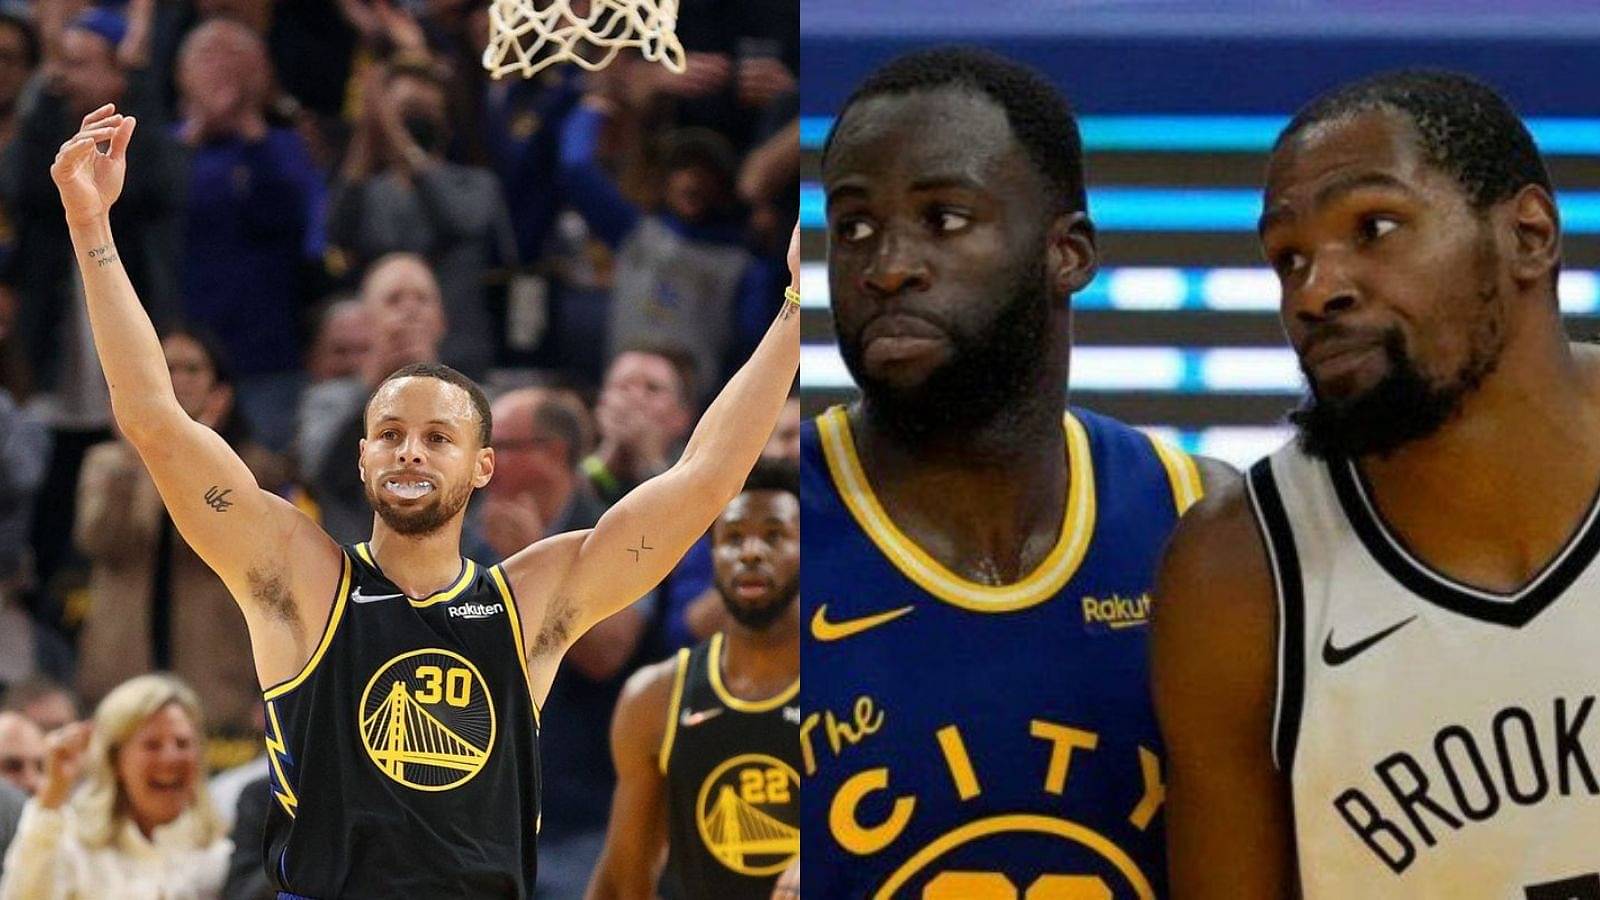 “Kevin Durant, don’t listen to snippets and get baited into tweeting Champ!”: Draymond Green and The Slim Reaper go back and forth on Twitter discussing Stephen Curry’s legacy